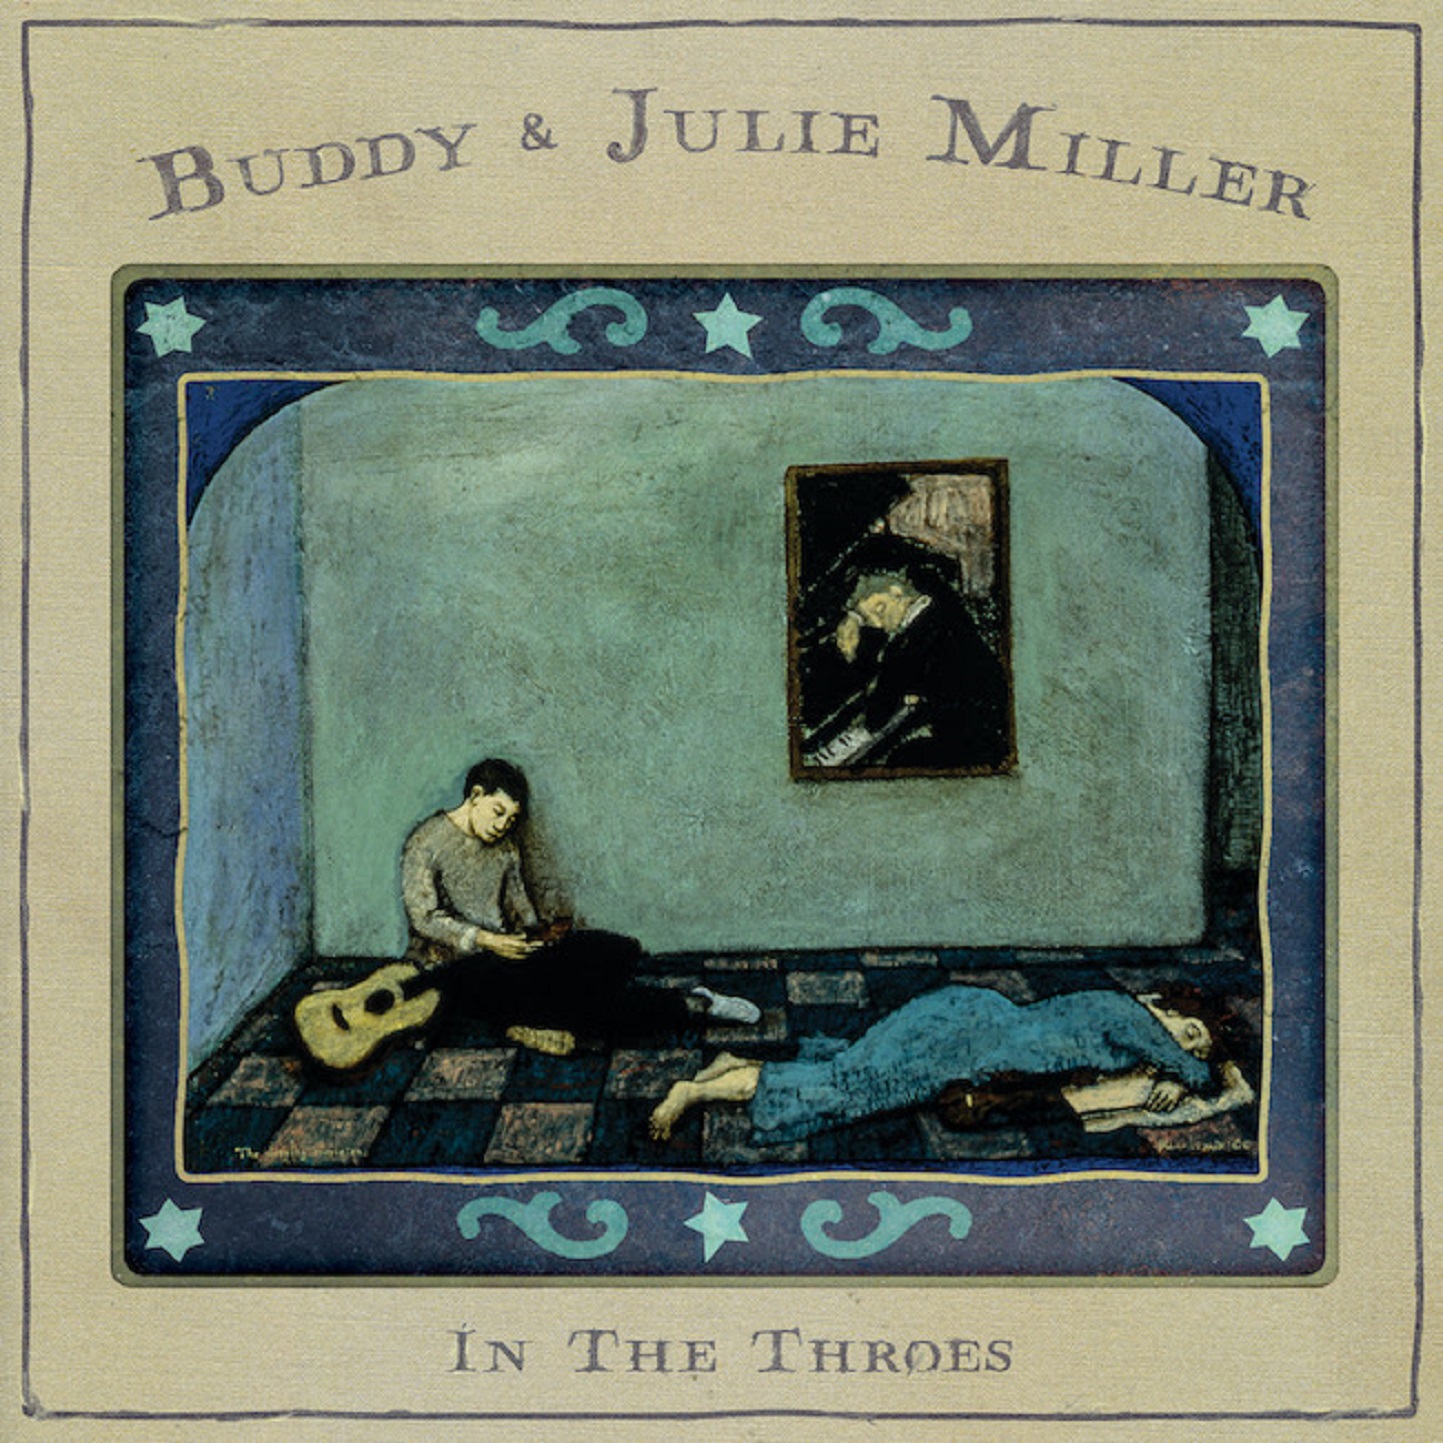 Buddy & Julie Miller Share Bob Dylan Co-Write "Don't Make Her Cry" Today - "In The Throes" To Be Released September 22